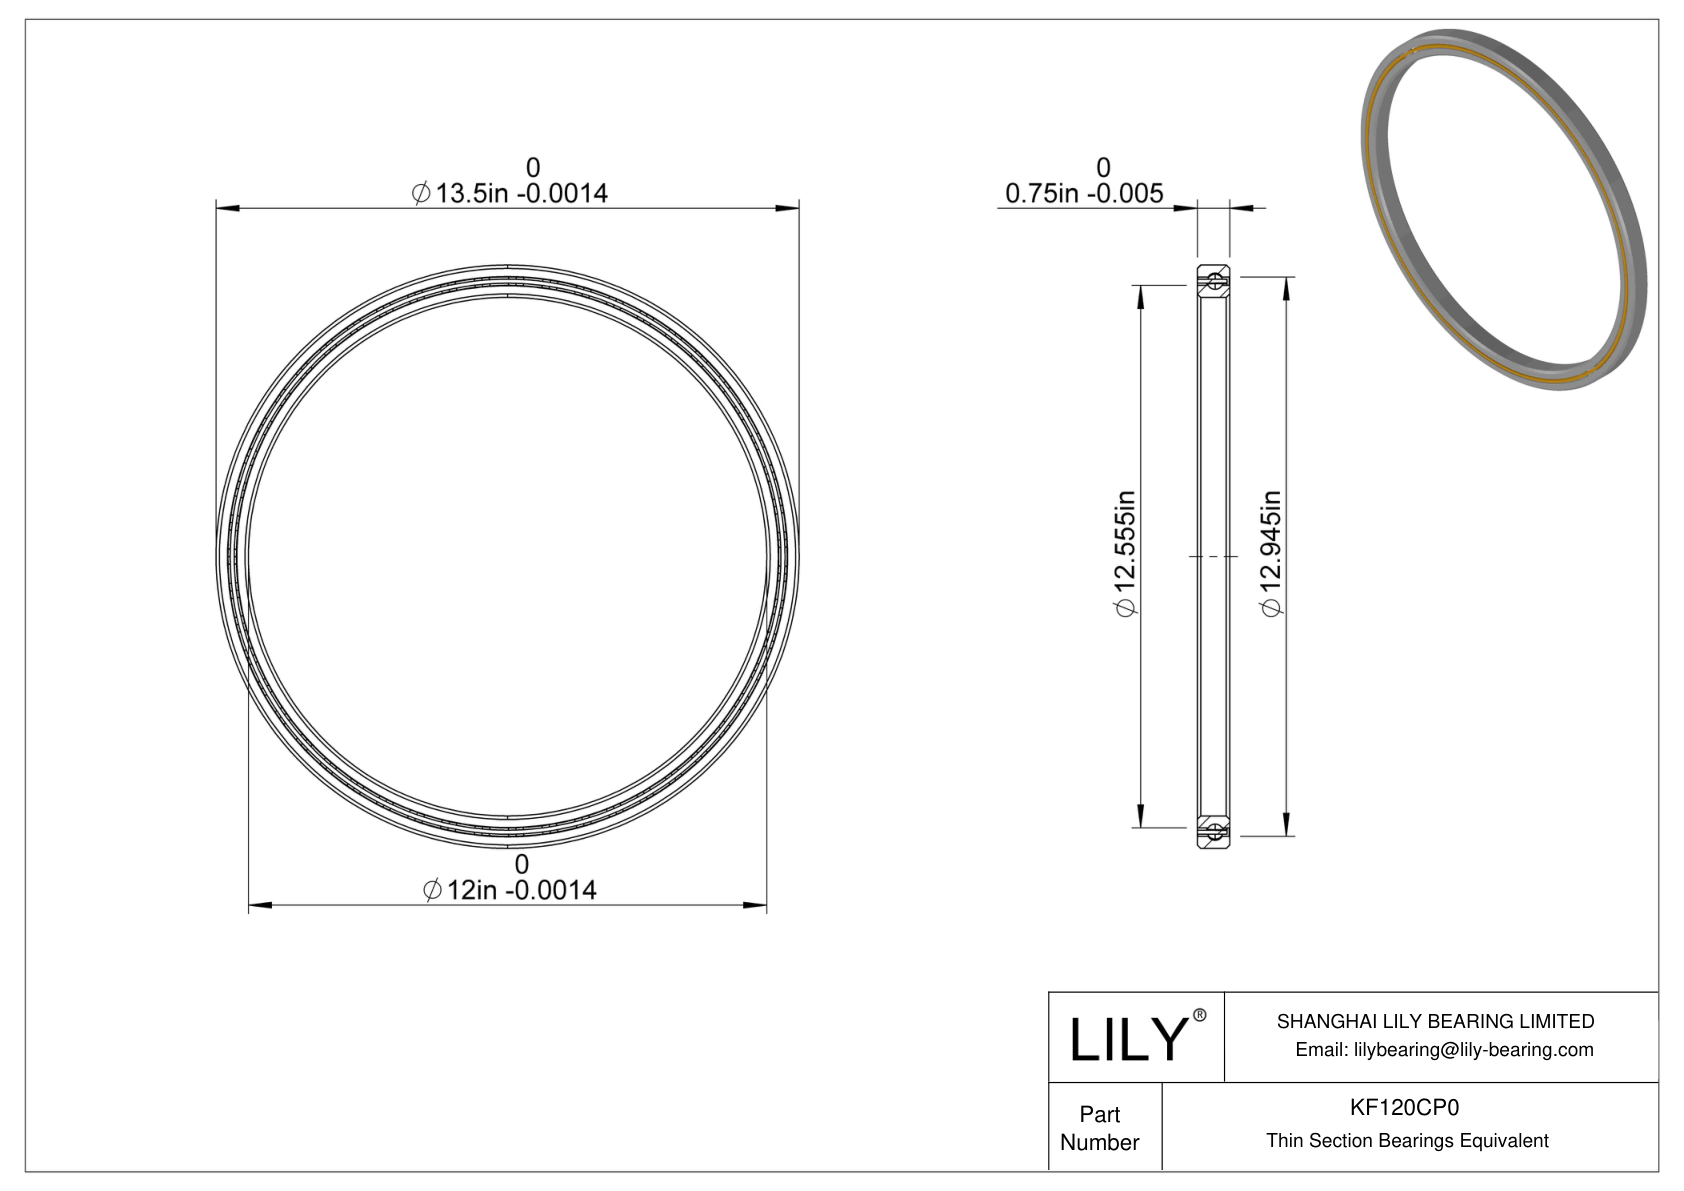 KF120CP0 Constant Section (CS) Bearings cad drawing